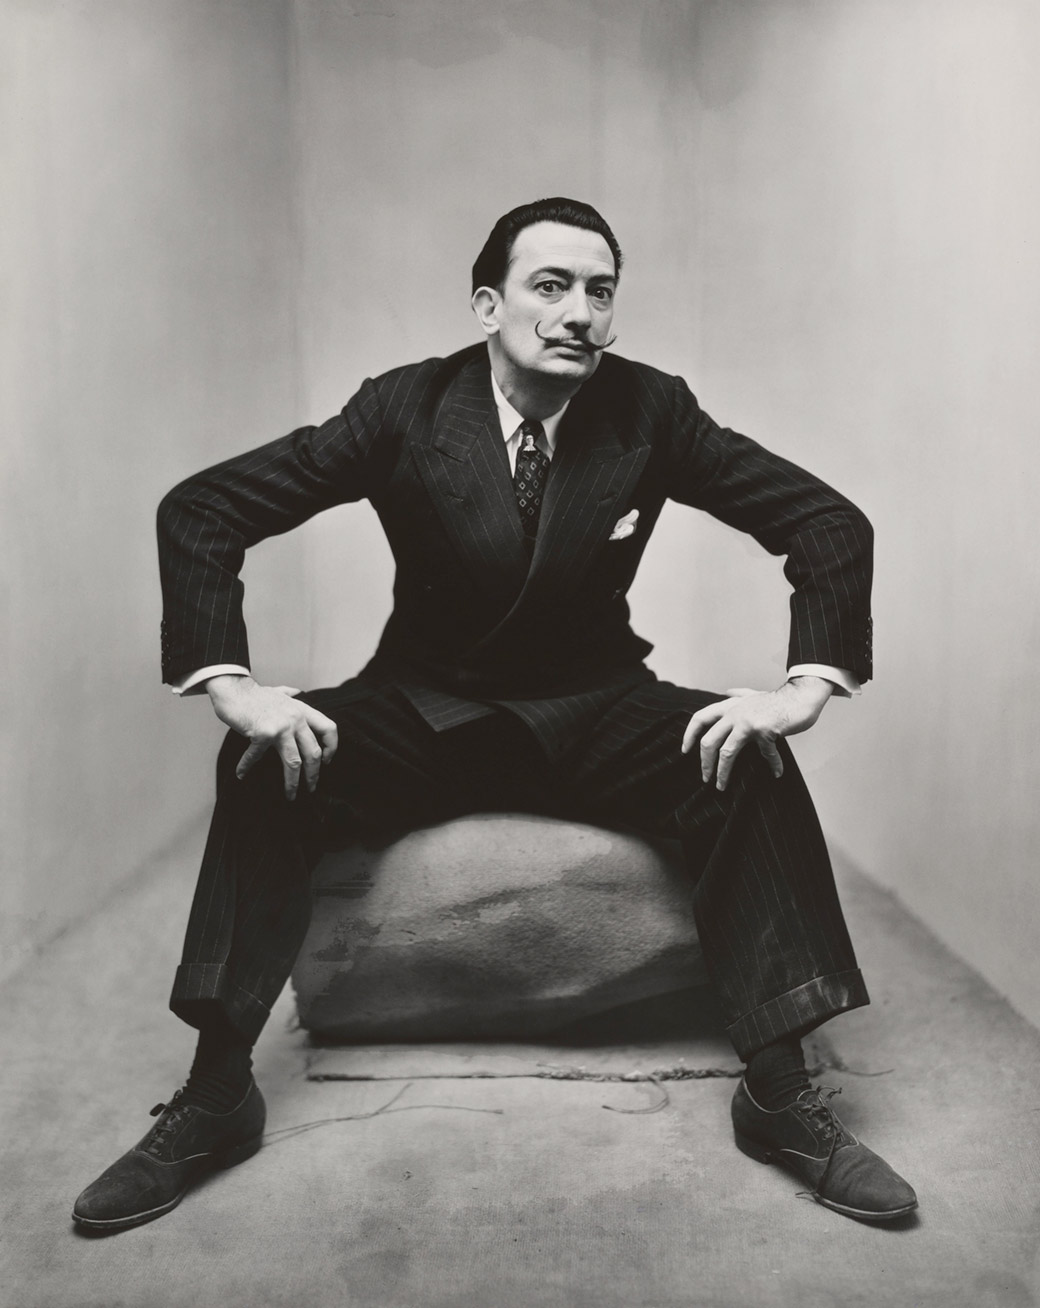 © The Irving Penn Foundation, Courtesy of The Sir Elton John Photography Collection